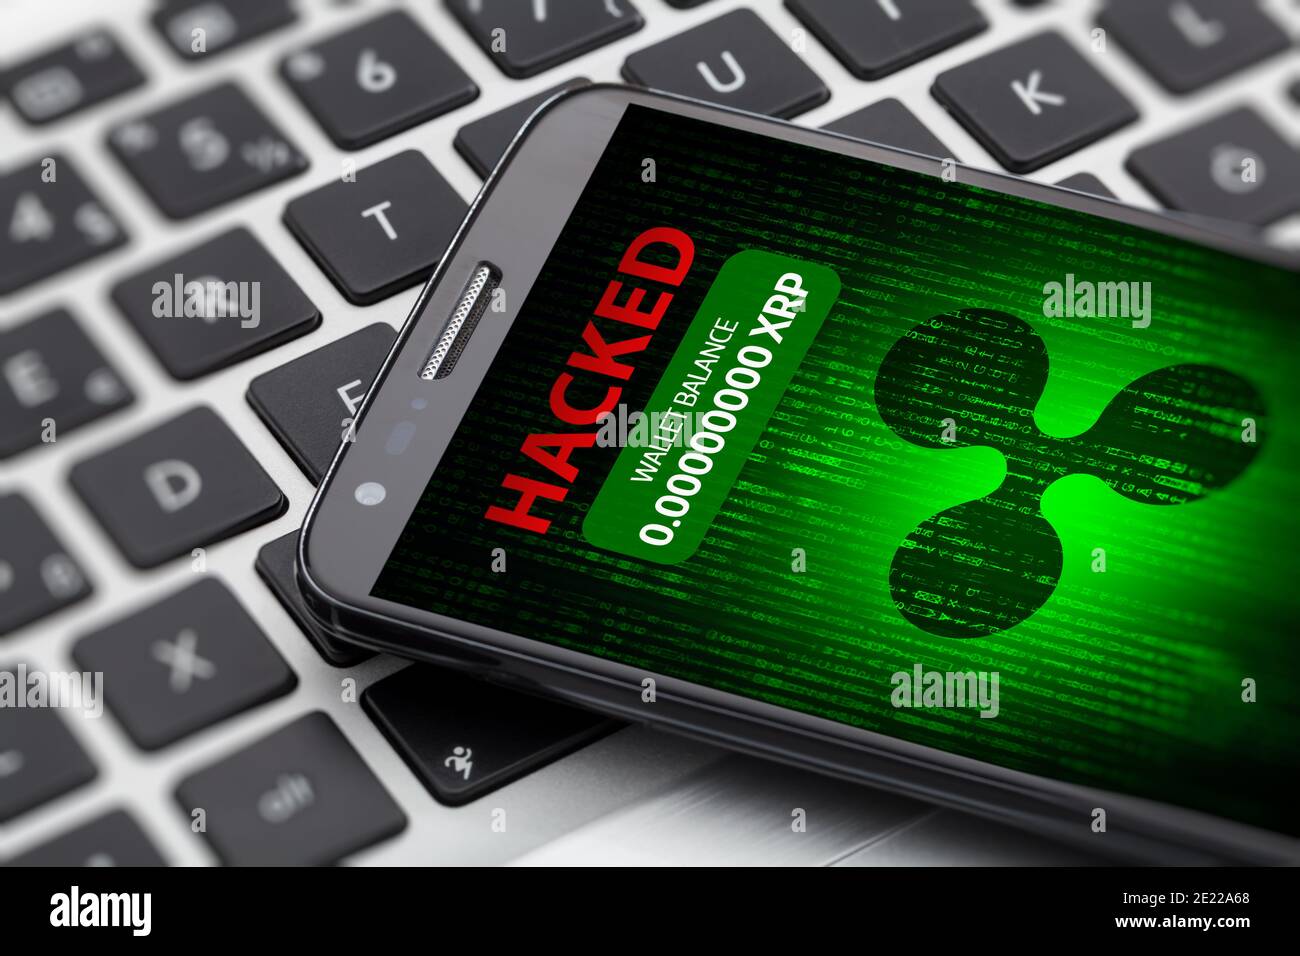 ripple wallet hacked message on smart phone screen. Cryptocurrency theft concept. Stock Photo